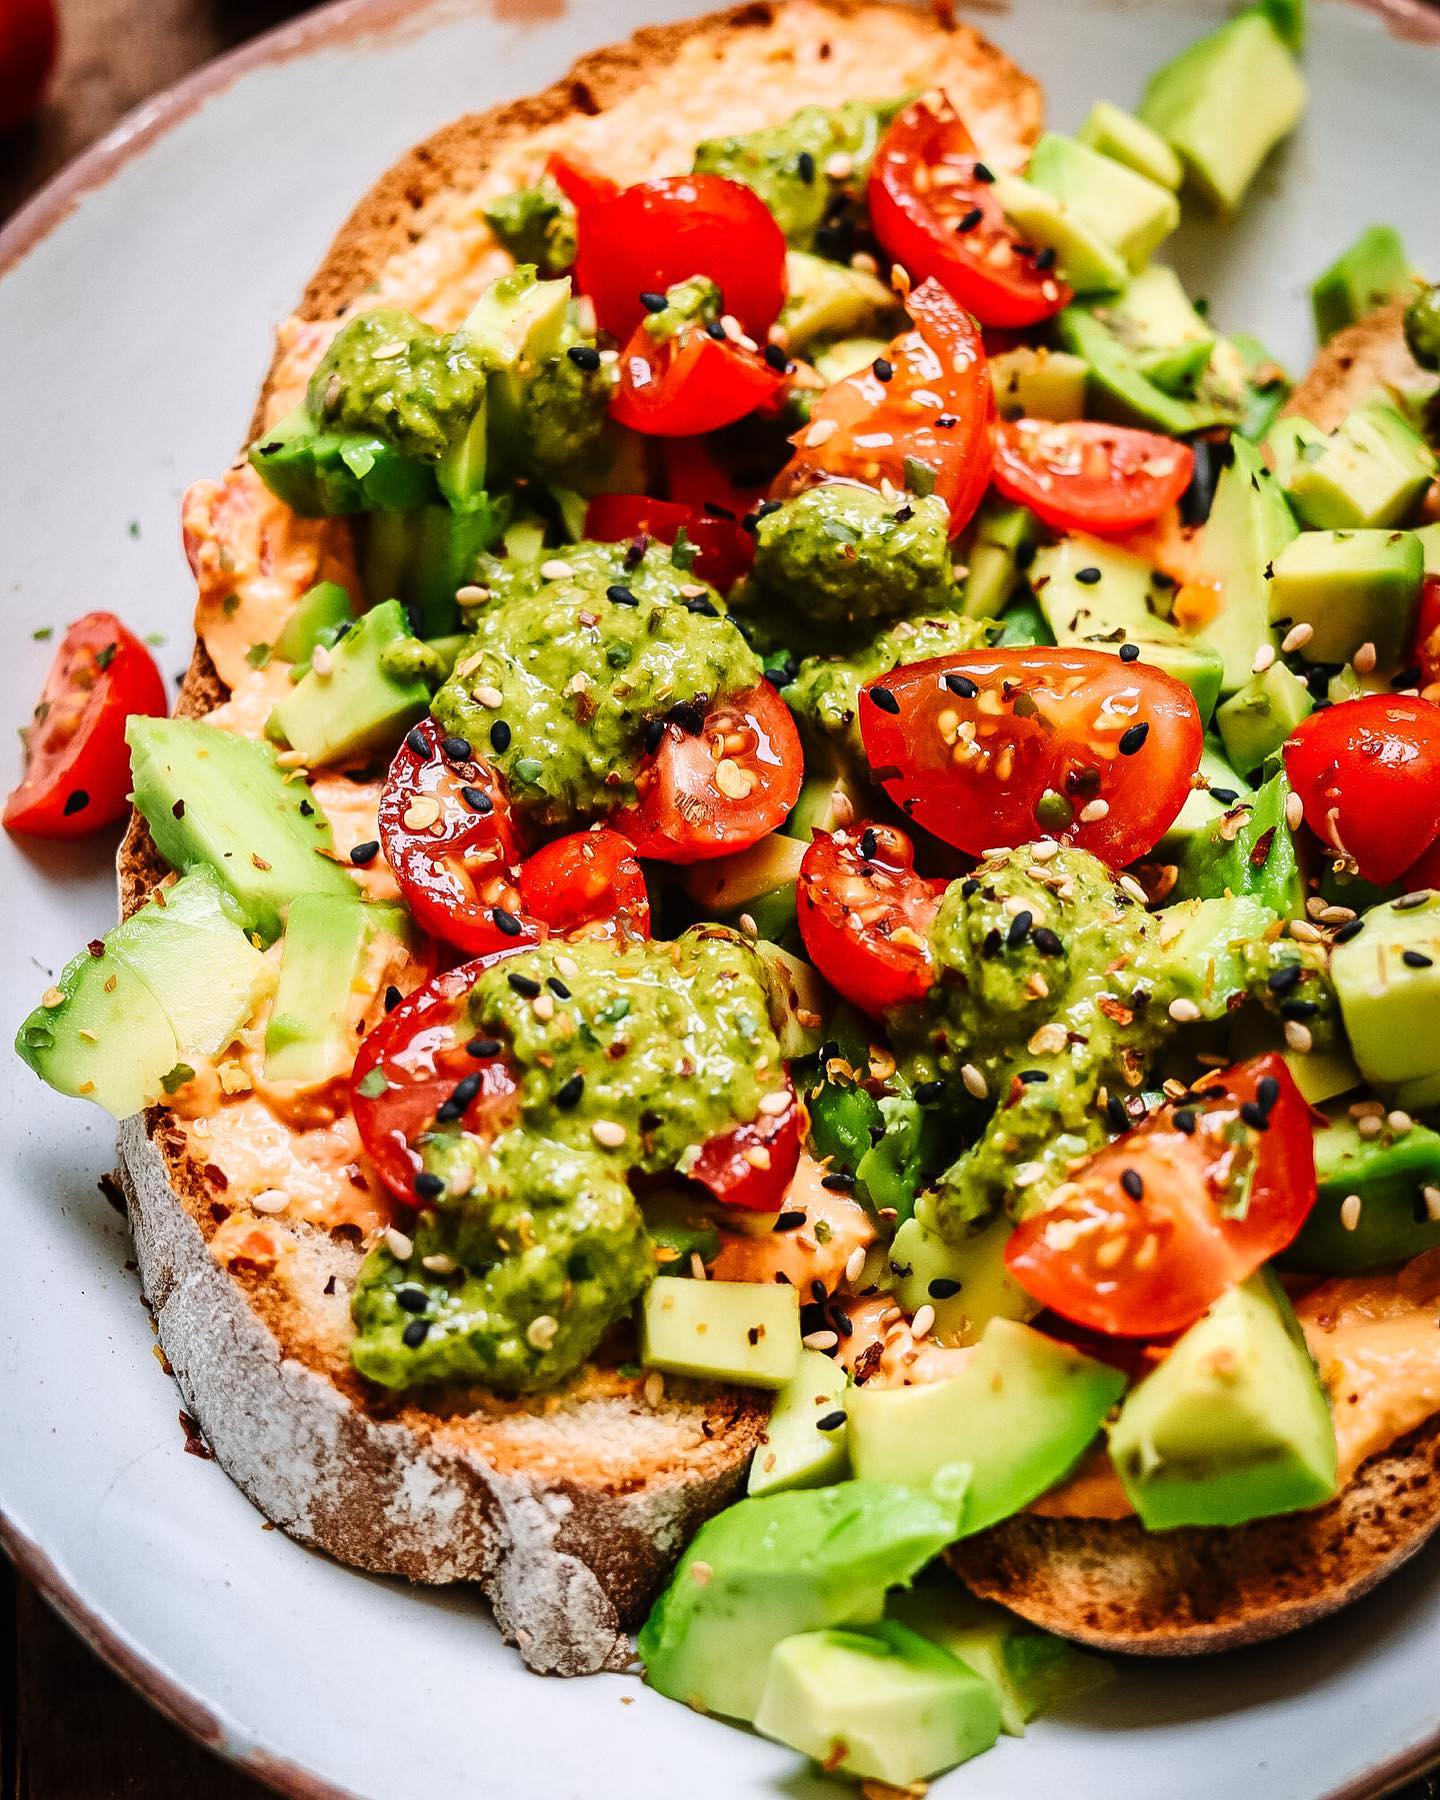 Avocado Toast with Roasted Red Pepper Hummus and Chimichurri